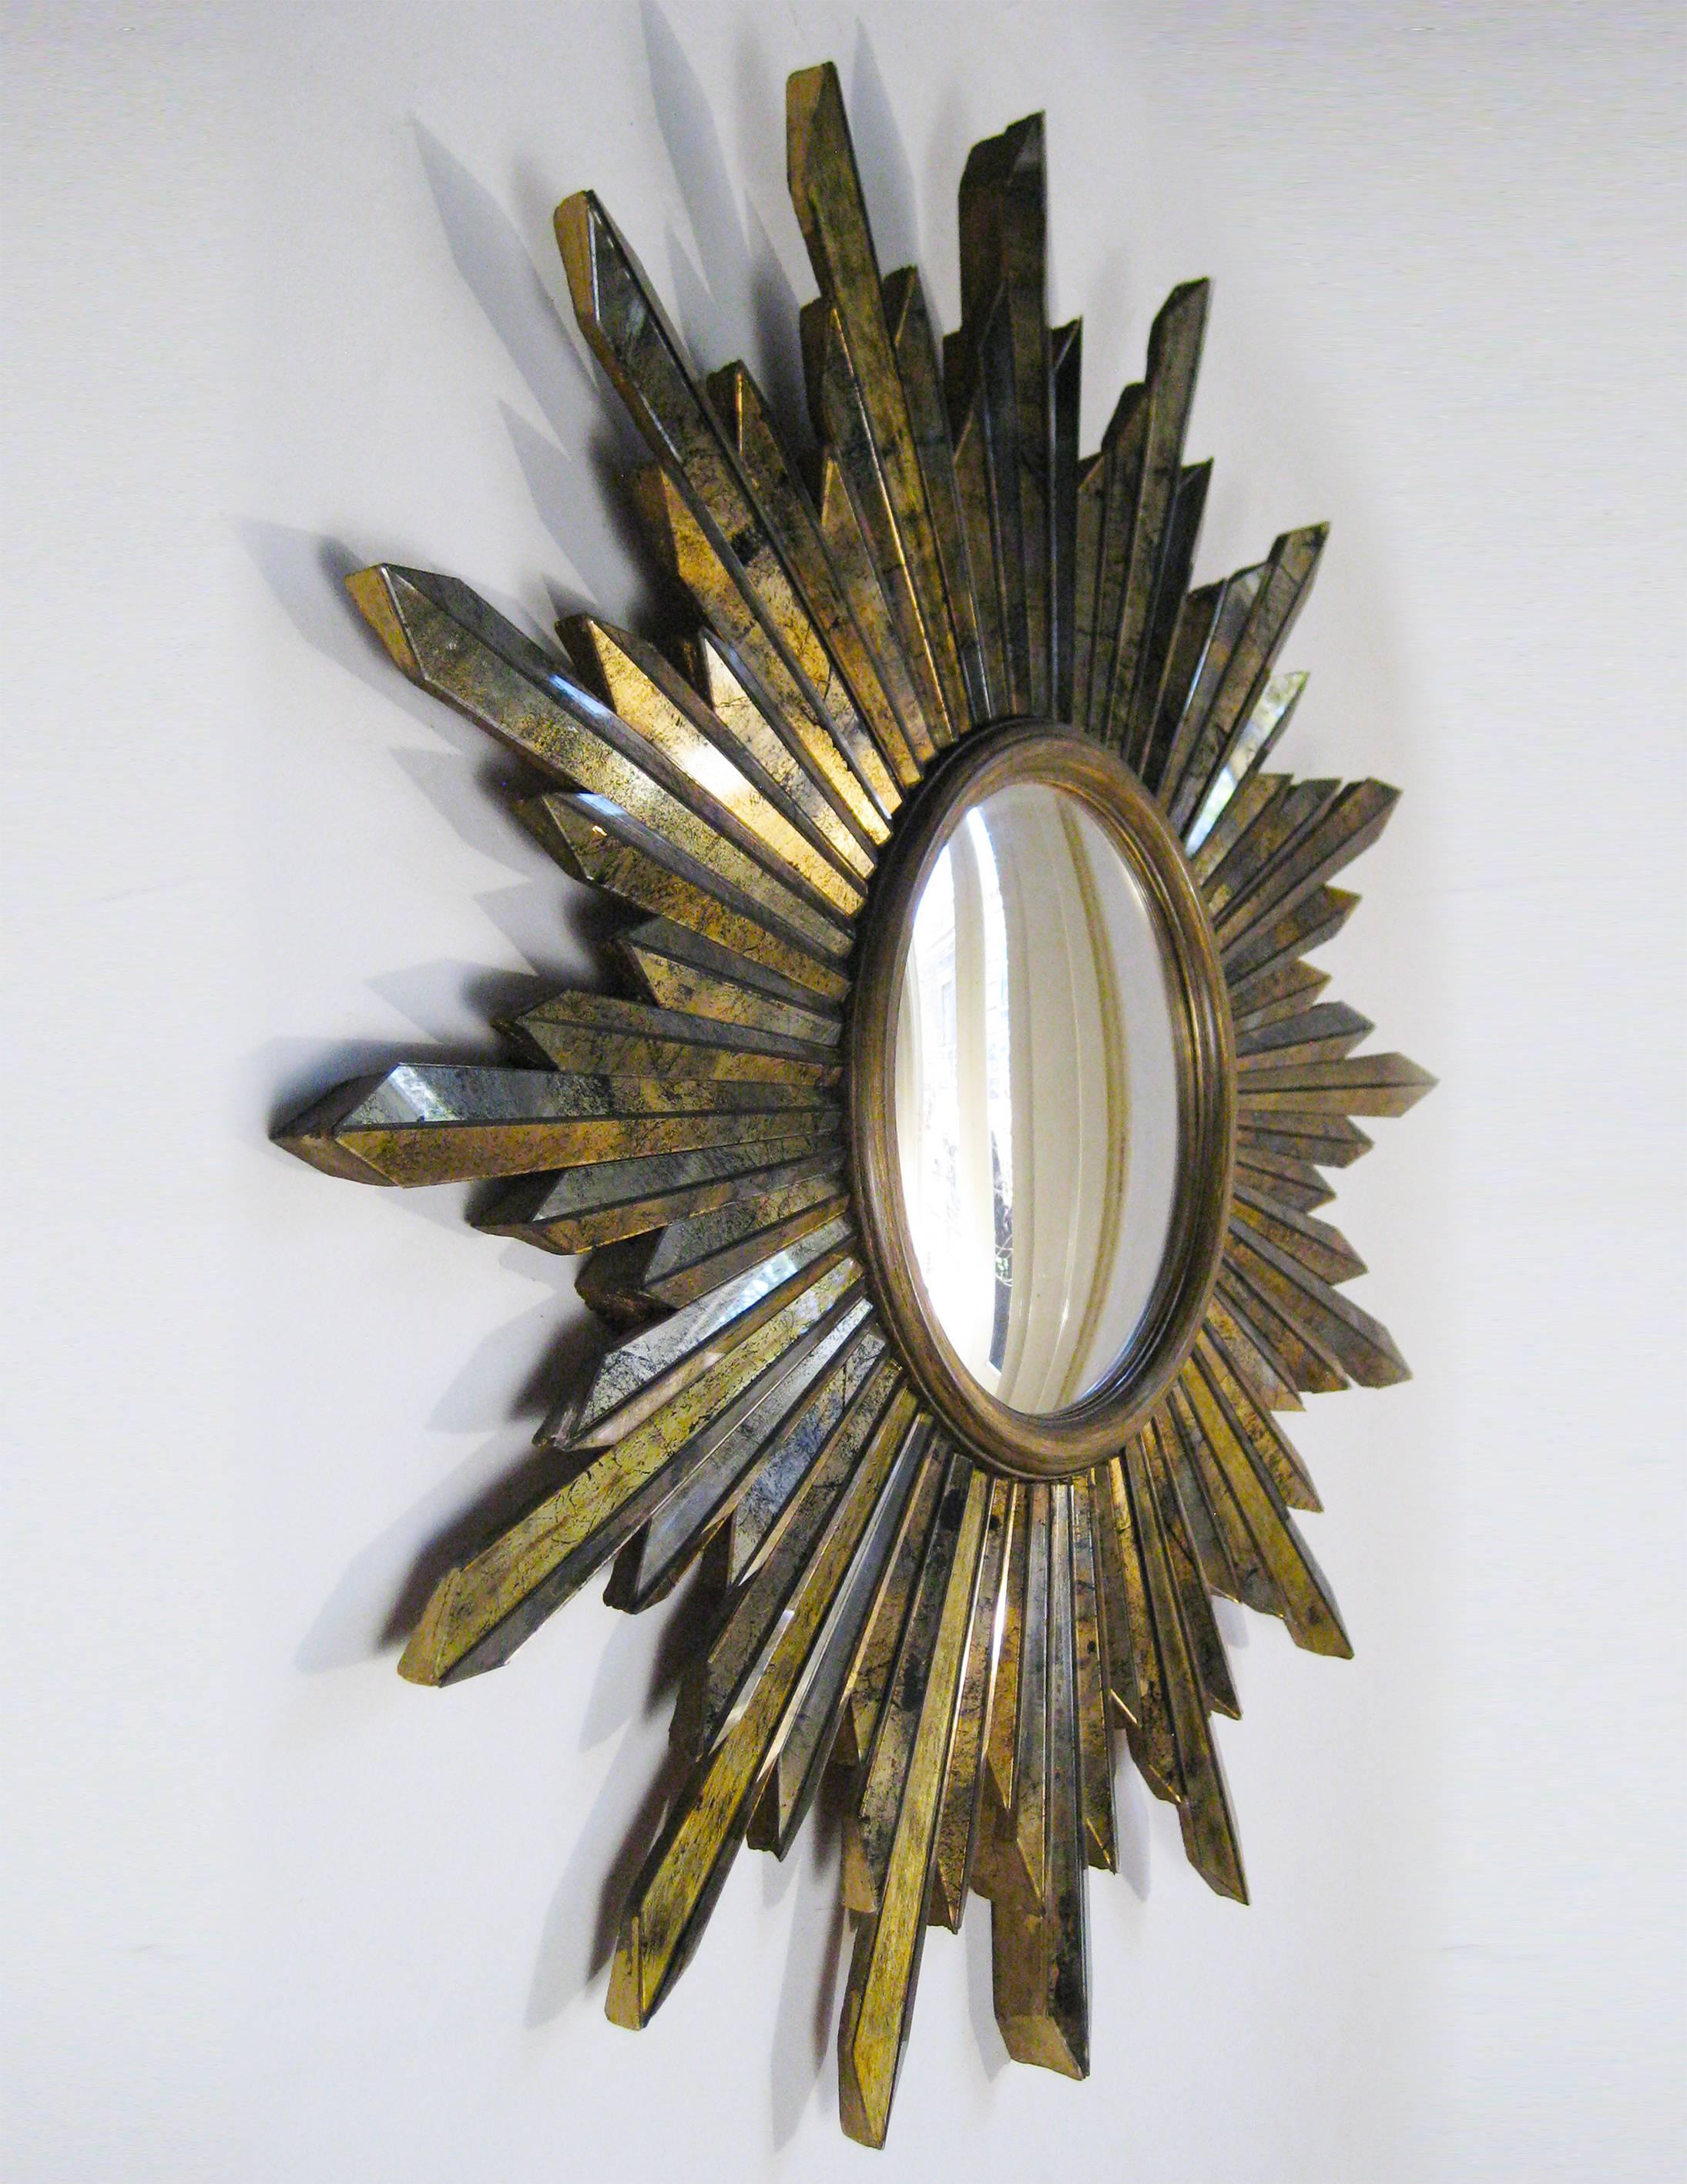 This large, quite spectacular convex sunburst mirror is fashioned from a heavy wooden, quite intricate frame, and every mirrored 